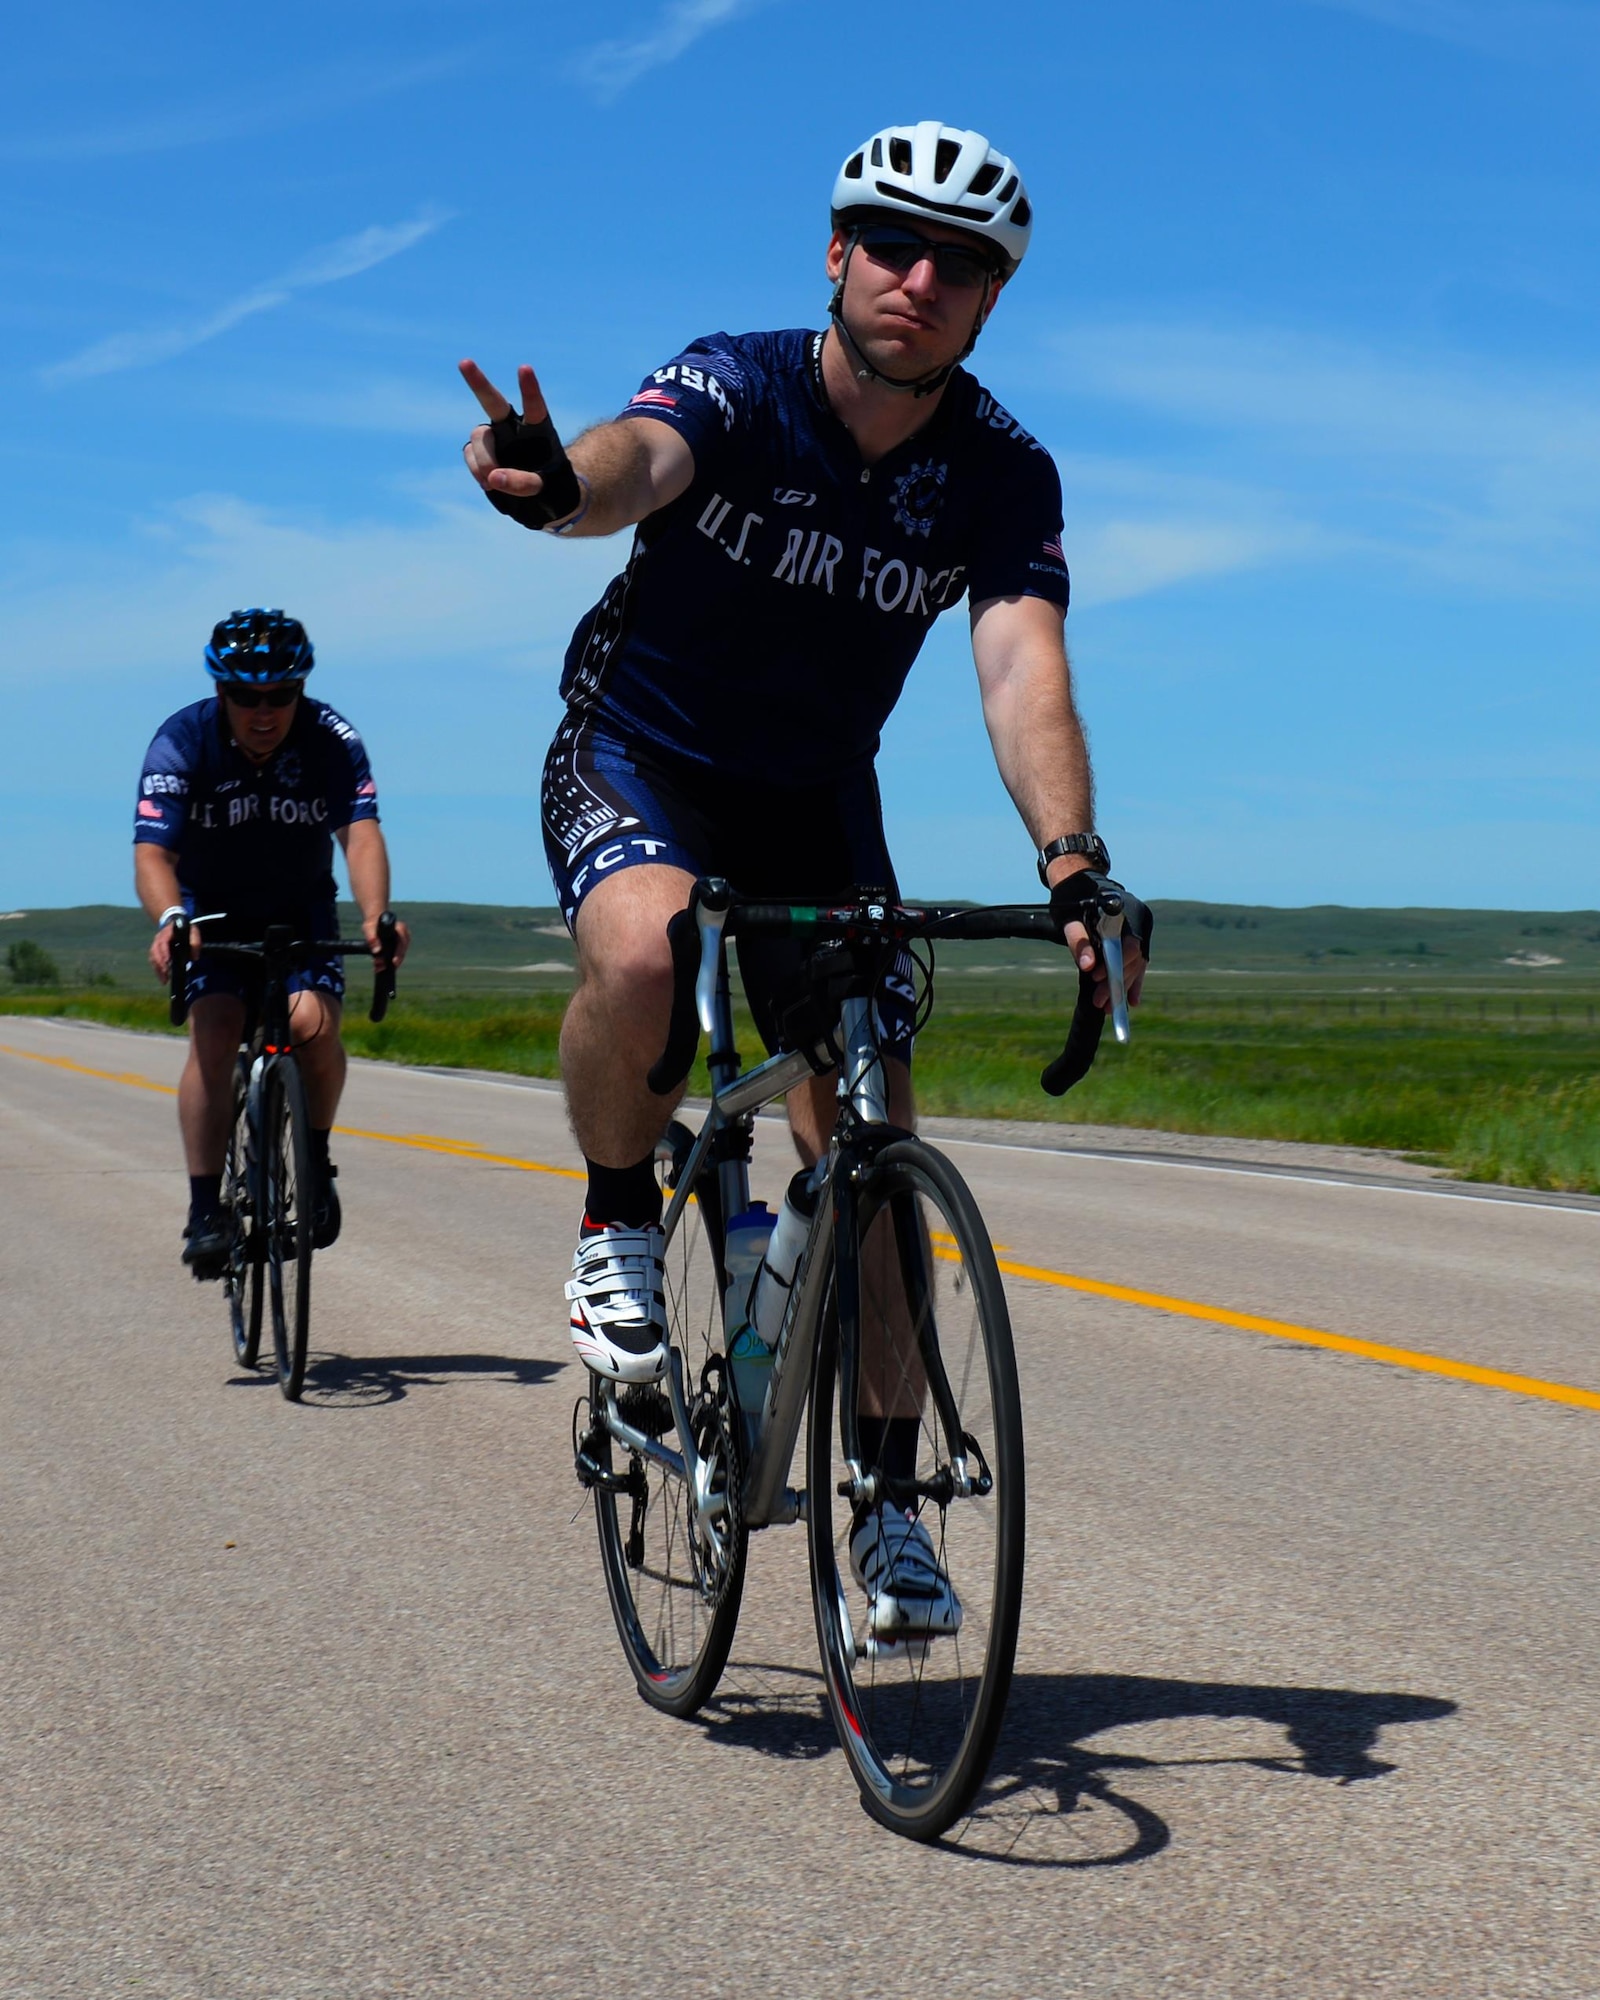 Capt. Eben Egler, a B-1 bomber weapon systems officer assigned to the 34th Bomb Squadron, and Maj. Anthony Bares, the director of inspections assigned to the 28th Bomb Wing Inspector General office, ride through the fourth pit stop during the Ride Across South Dakota bike tour near Scenic, S.D., June 4, 2017. During the first day of RASDAK, the ride included seven pit stops located eight to 20 miles away from each other over the span of 74 miles. (U.S. Air Force photo by Airman Nicolas Z. Erwin)